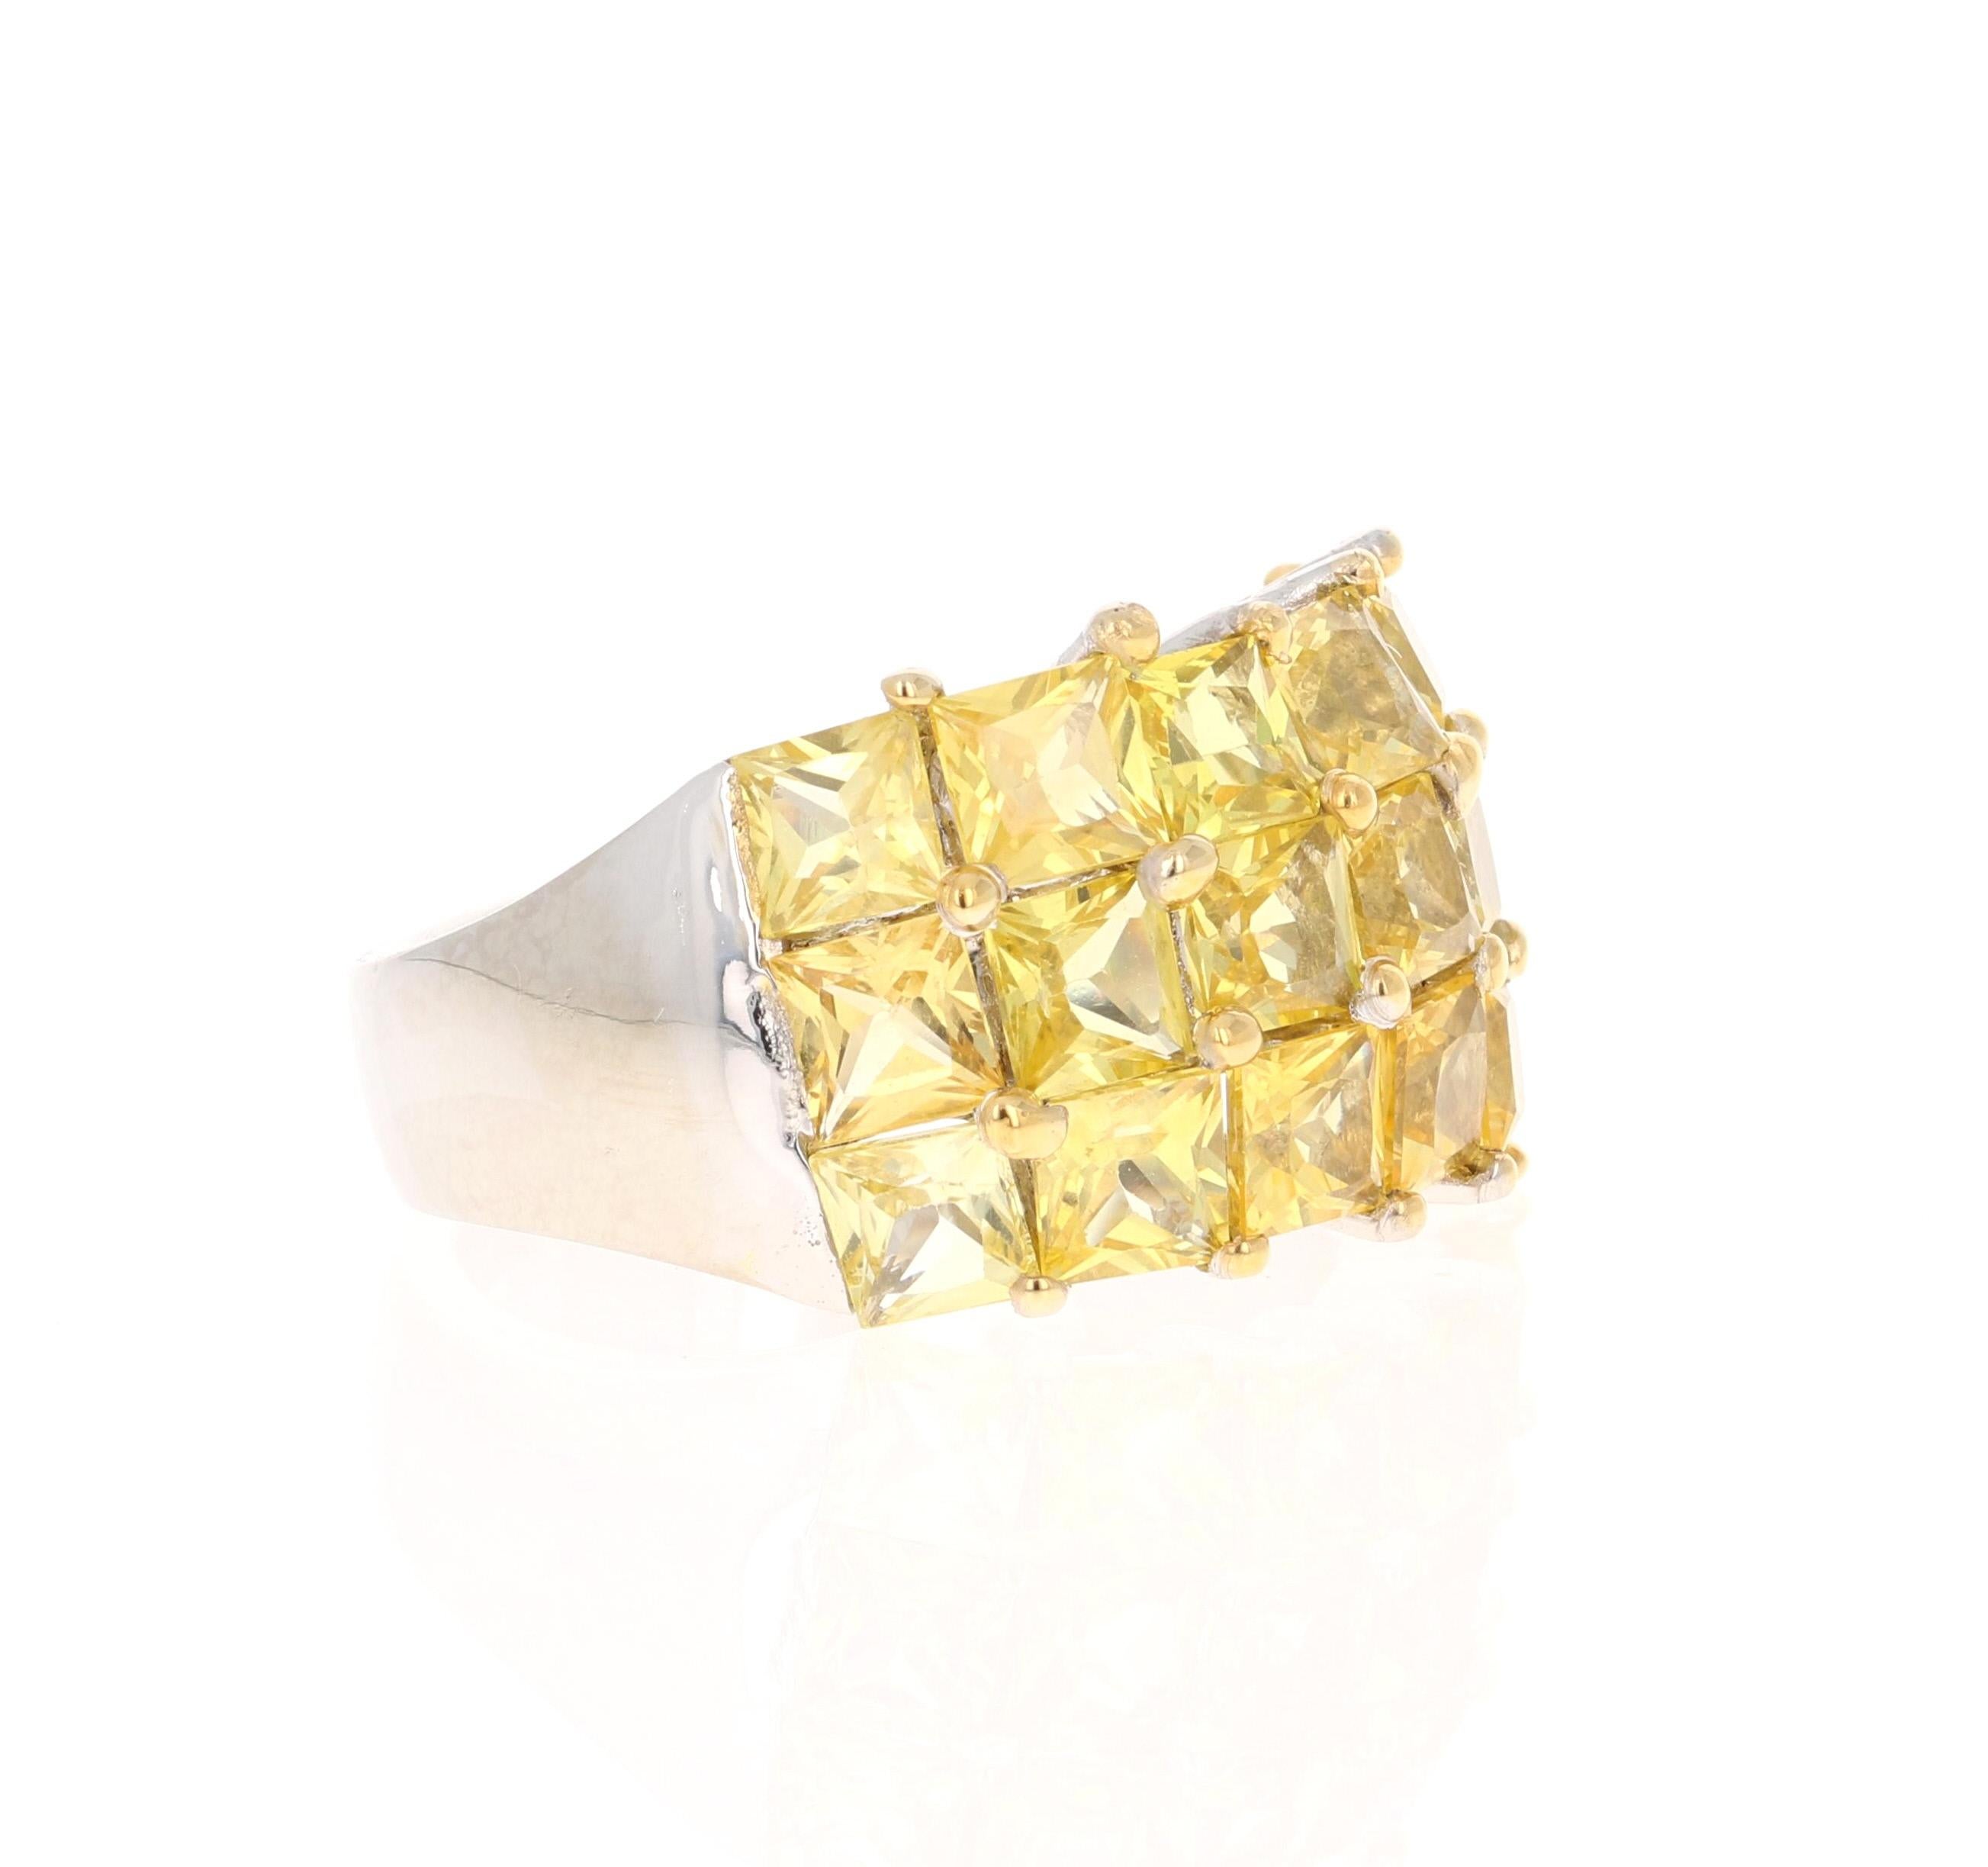 This ring has 18 Natural Square Cut Yellow Sapphires that weigh 7.39 Carats. 

Crafted in 14 Karat White Gold and weighs approximately 11.2 grams 

The ring is a size 7 and can be re-sized at no additional charge!